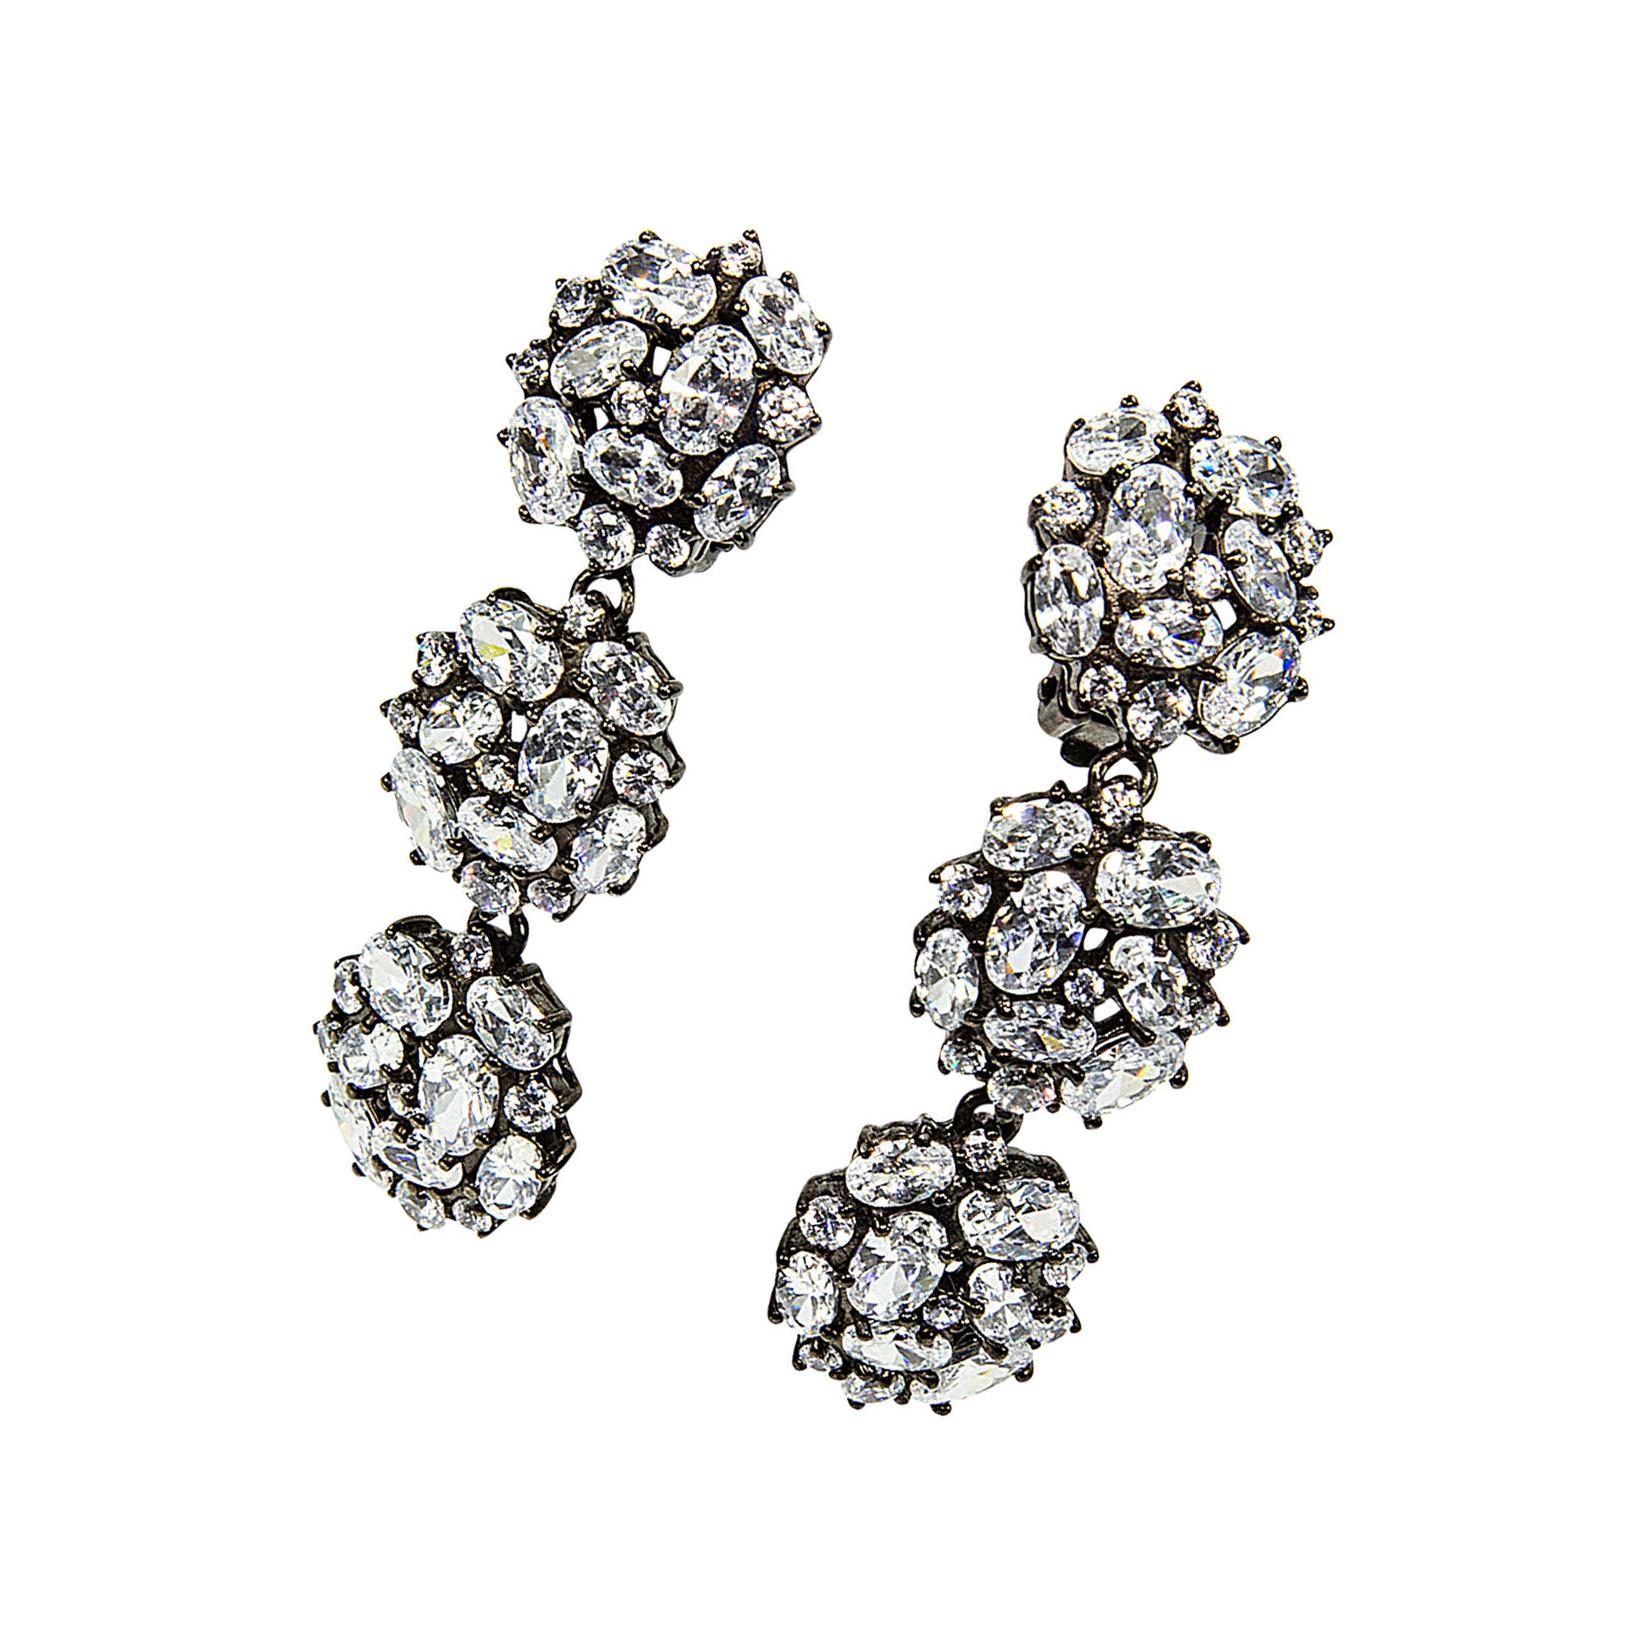 Contemporary Fabulous CZ Encrusted Triple Round Sterling Silver Drop Earrings